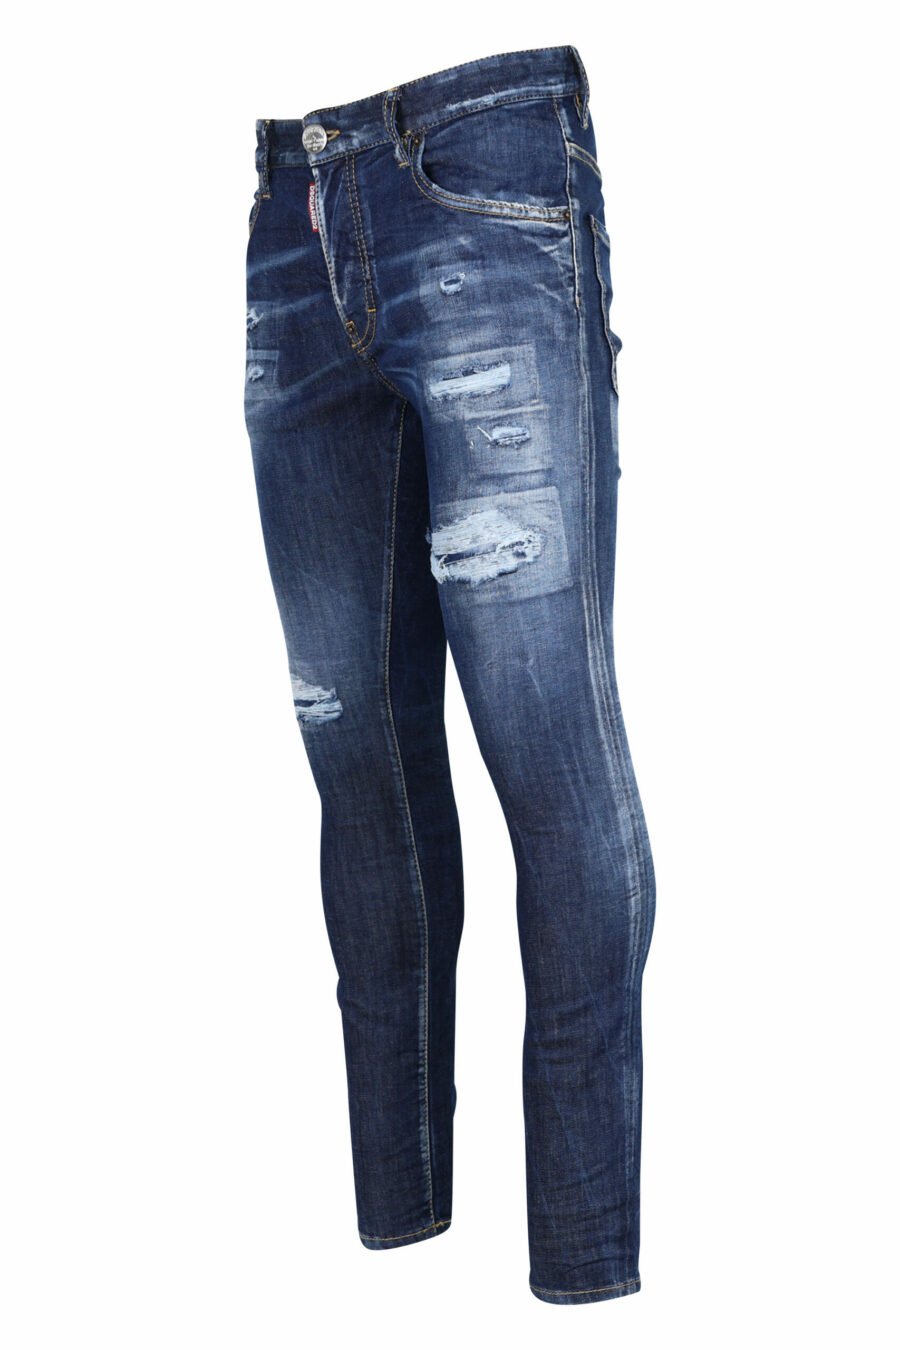 Blue "super twinky jean" jeans with rips and frayed - 8054148106201 1 scaled